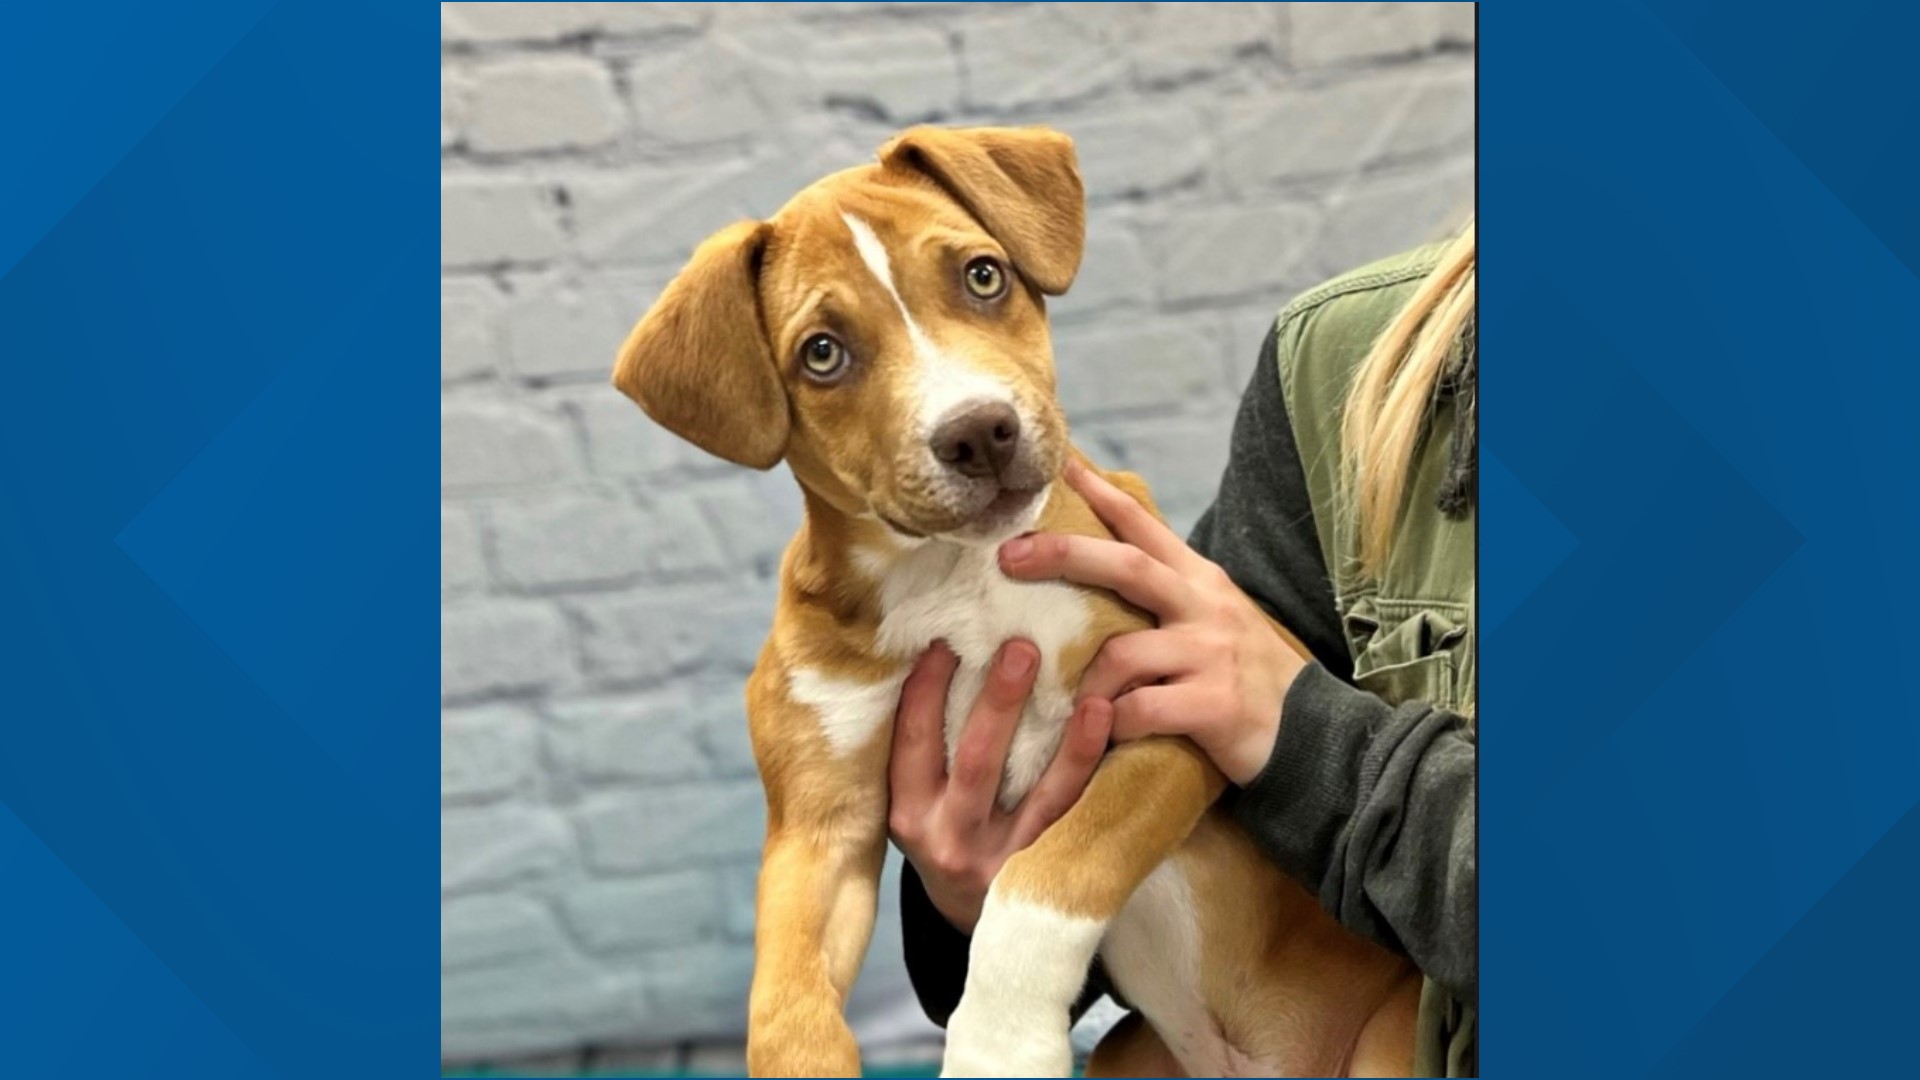 Meet Tango, a 12-week-old mixed breed puppy, now available for adoption at Pound Buddies Muskegon.